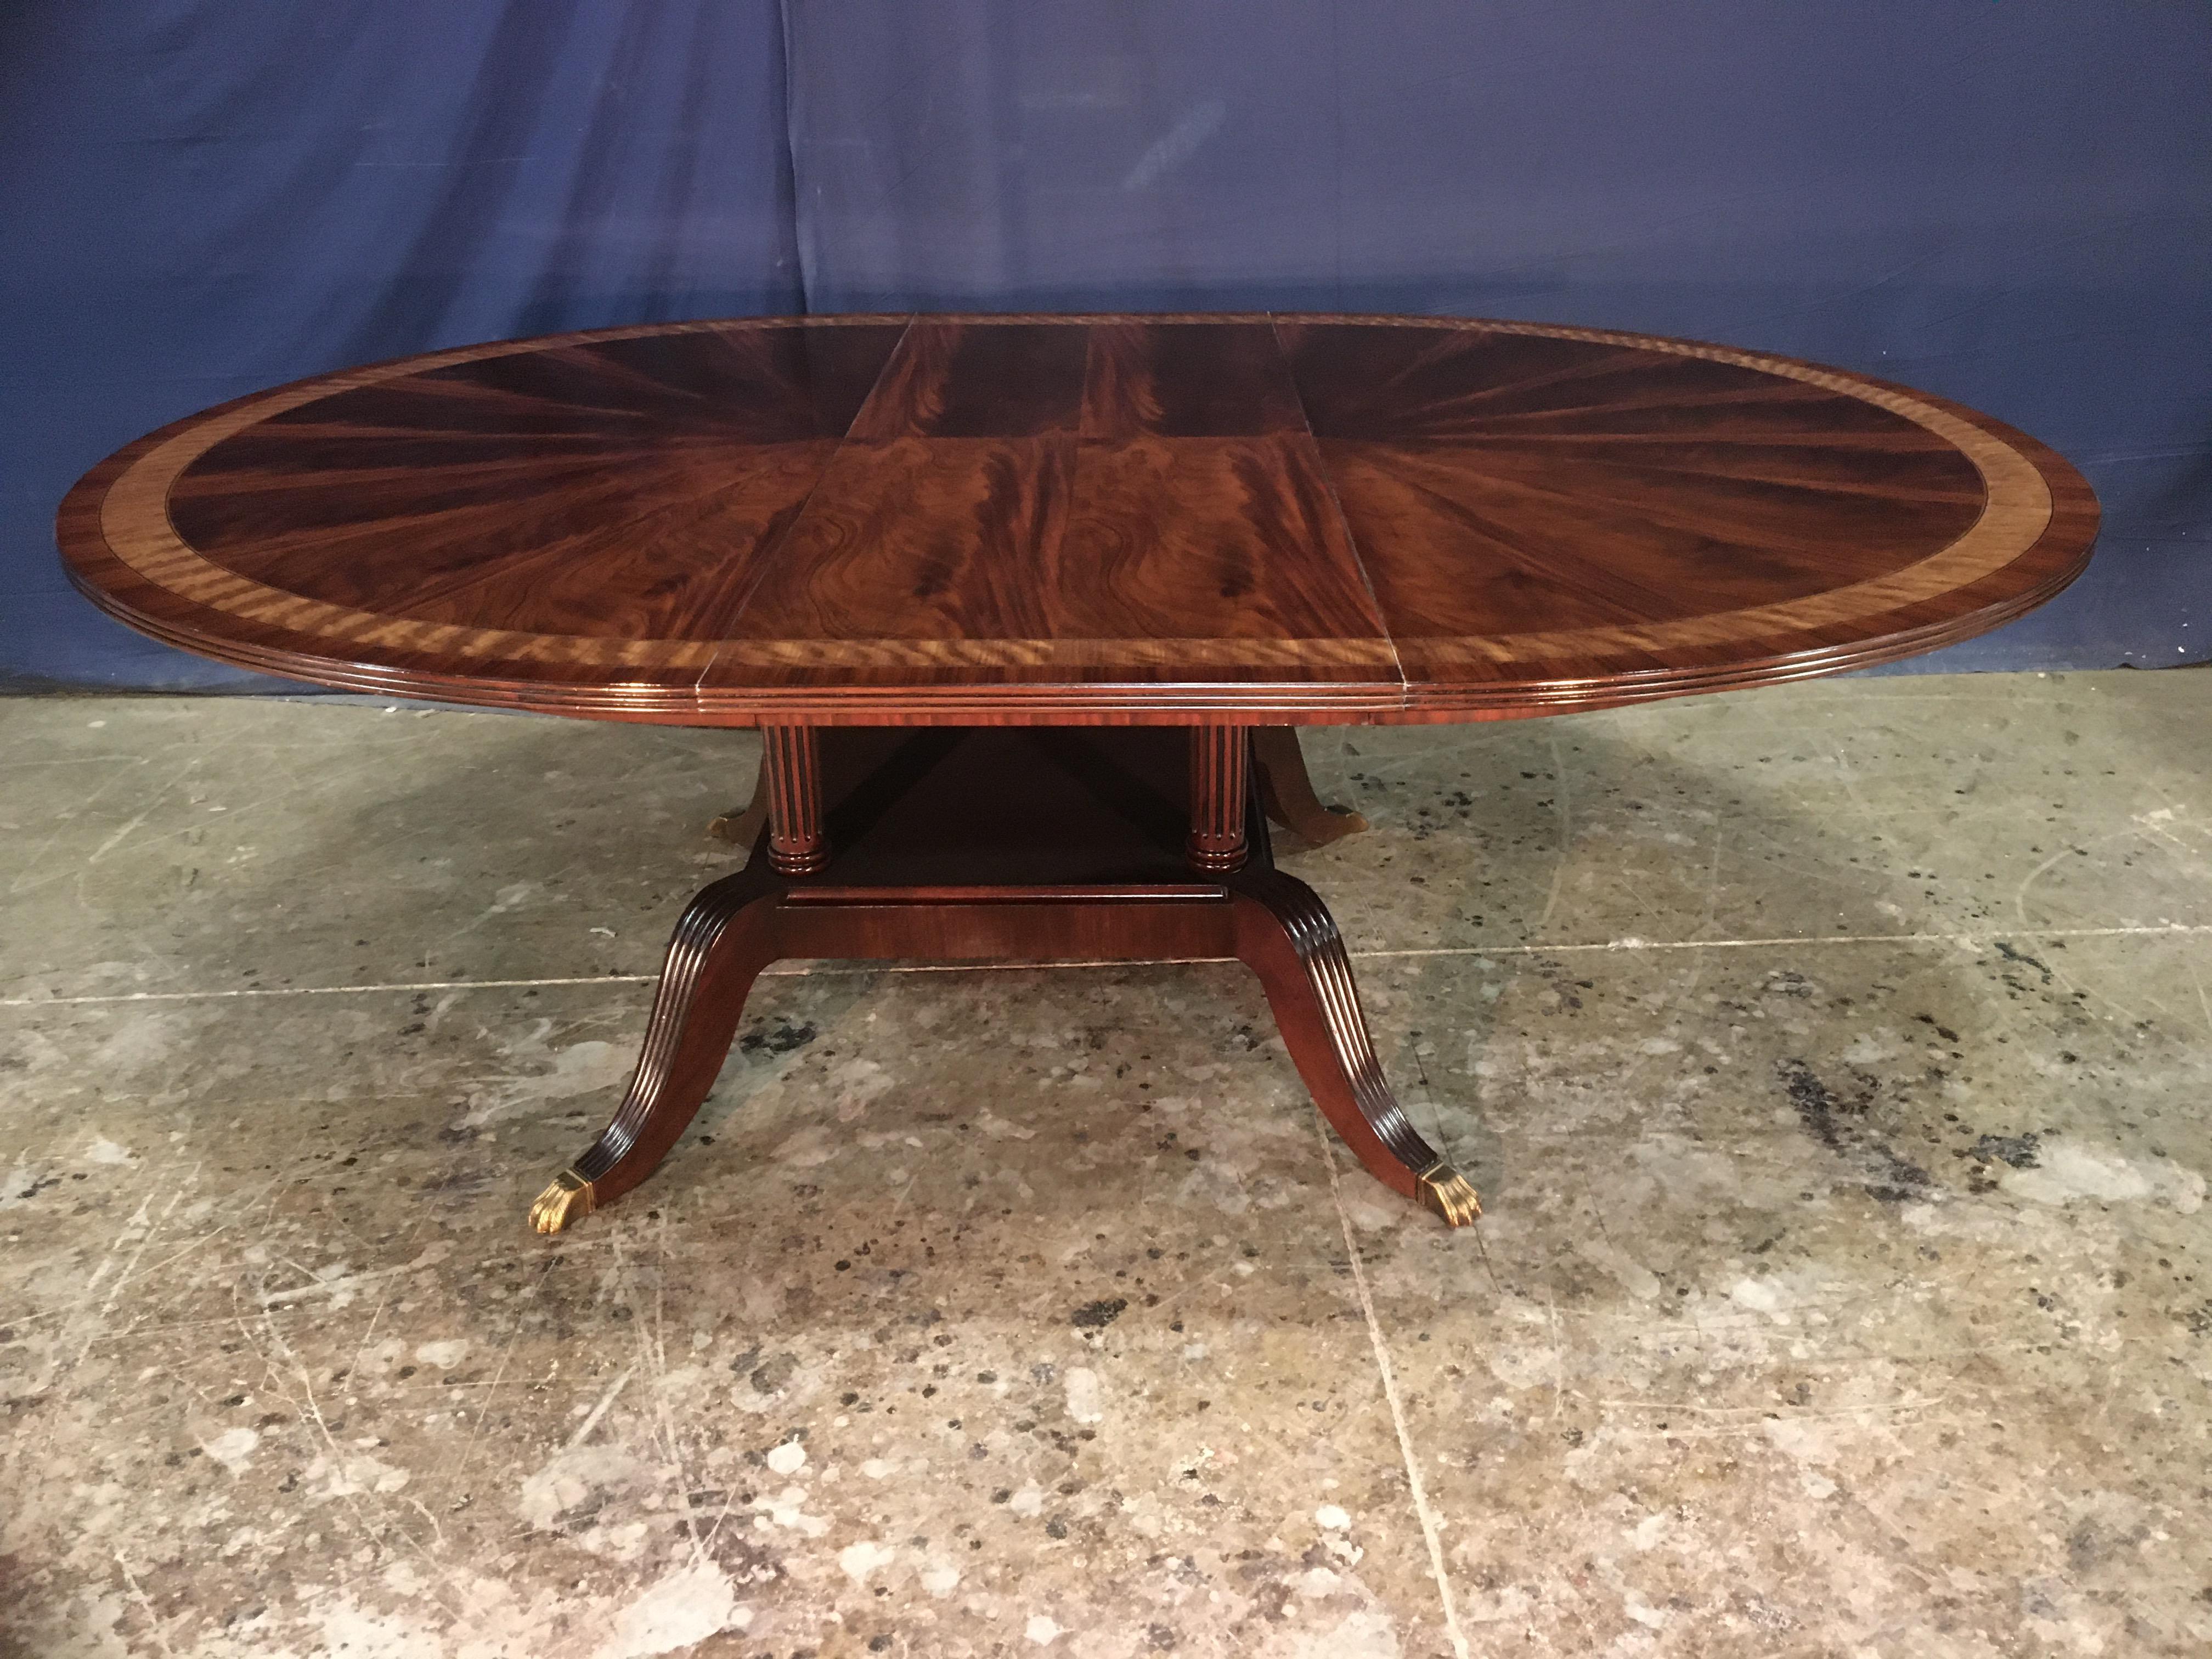 This is made-to-order round traditional mahogany dining table made in the Leighton Hall shop. It features a radial cut field of West African swirly crotch mahogany and two borders of satinwood and Pau Ferro.  The top has a medium brown mahogany